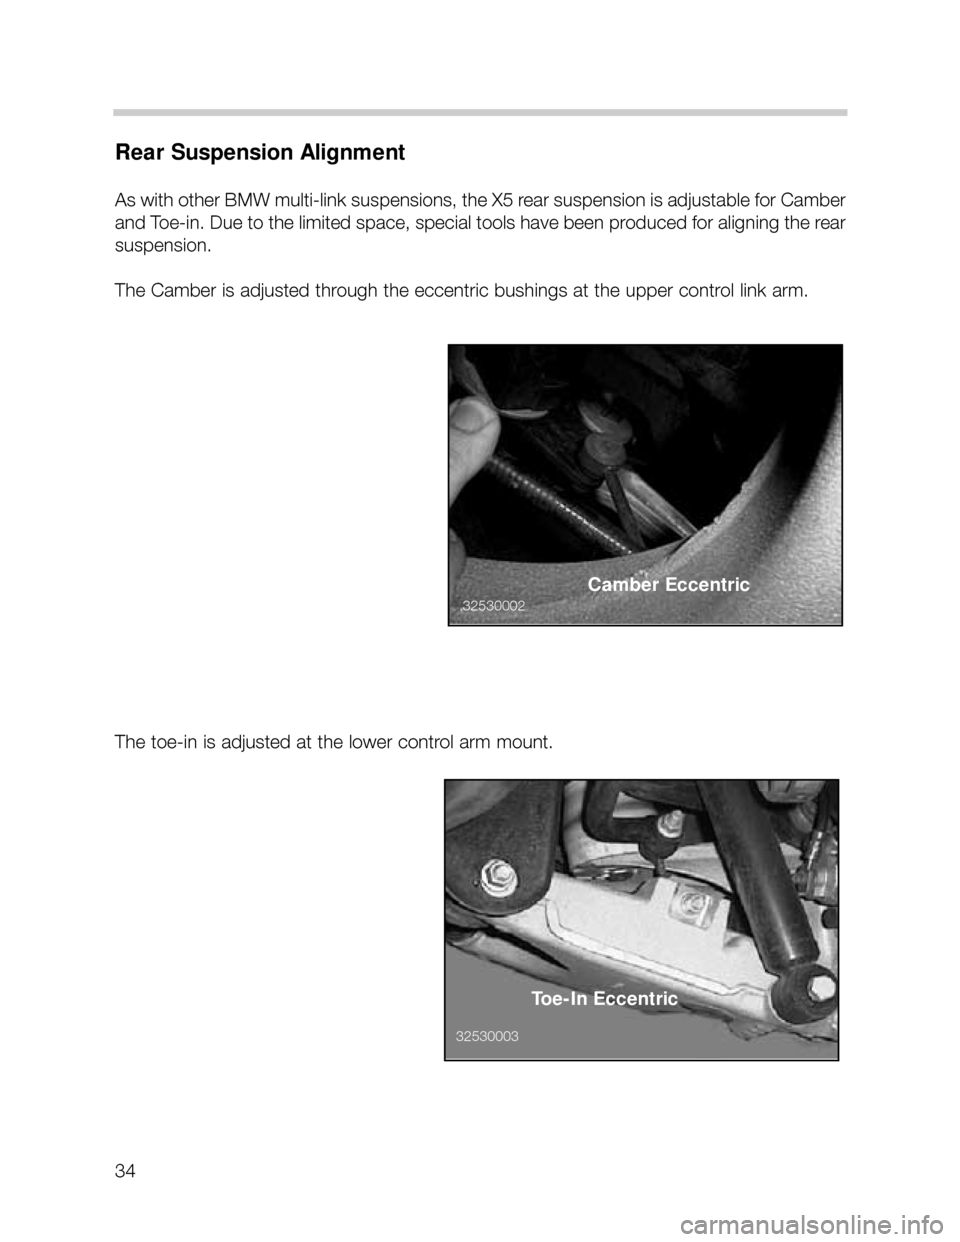 BMW X5 2004 E53 Owners Guide 34
Rear Suspension Alignment
As with other BMW multi-link suspensions, the X5 rear suspension is adjustable for Camber
and Toe-in. Due to the limited space, special tools have been produced for aligni